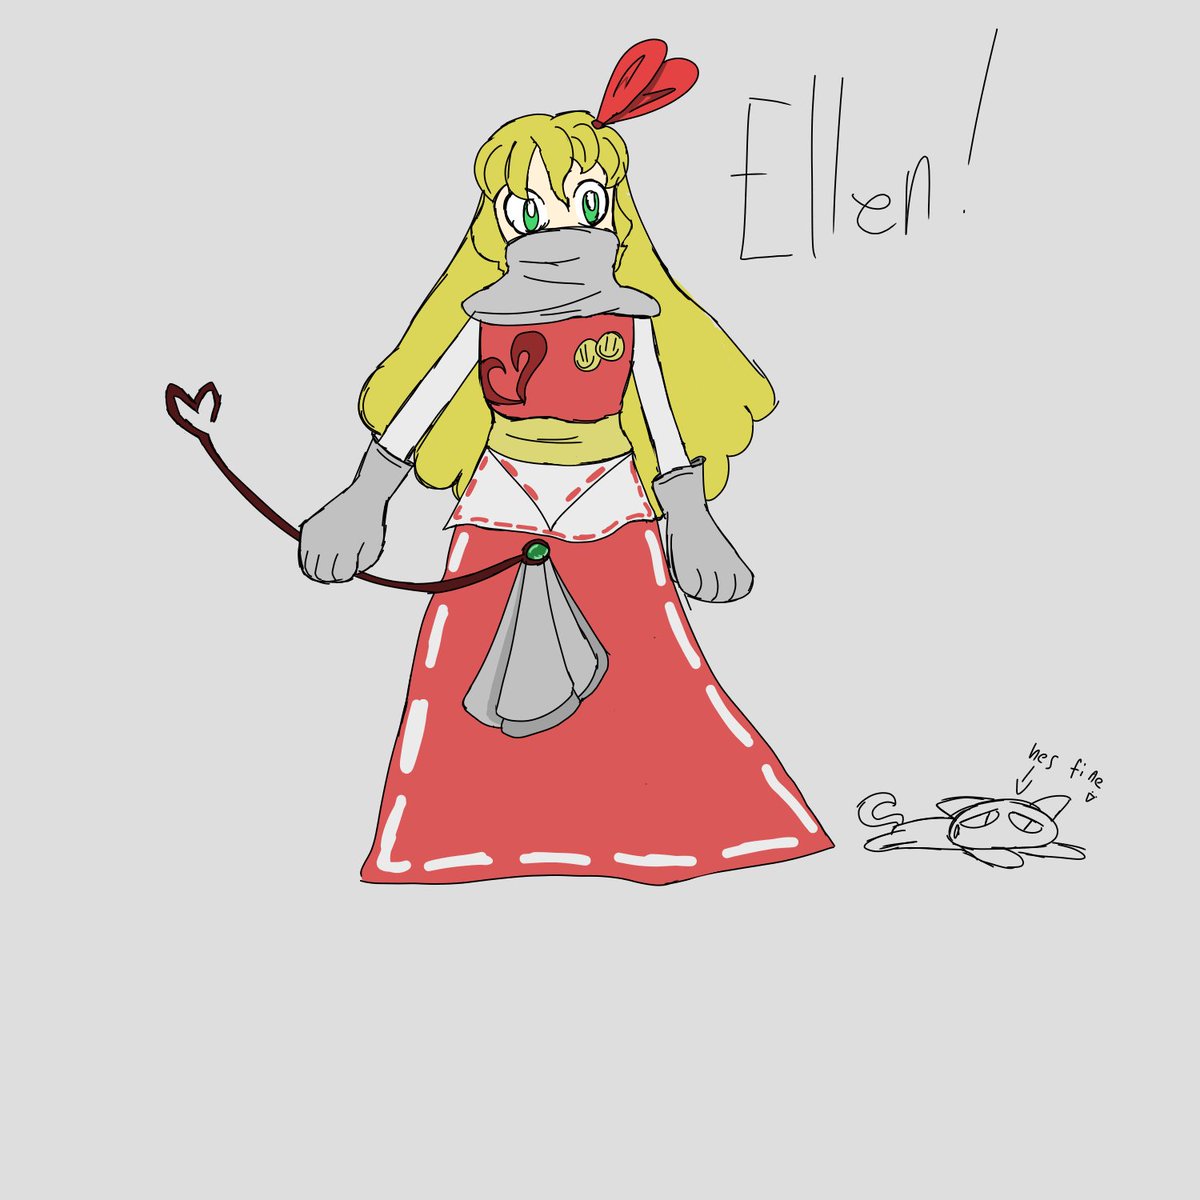 back to it

ellen!! i took inspiration from her manga designs and i felt obligated to add the happy pins
she almost kinda looks like a shrine maiden, that stick is just her feather duster though

could be wider-